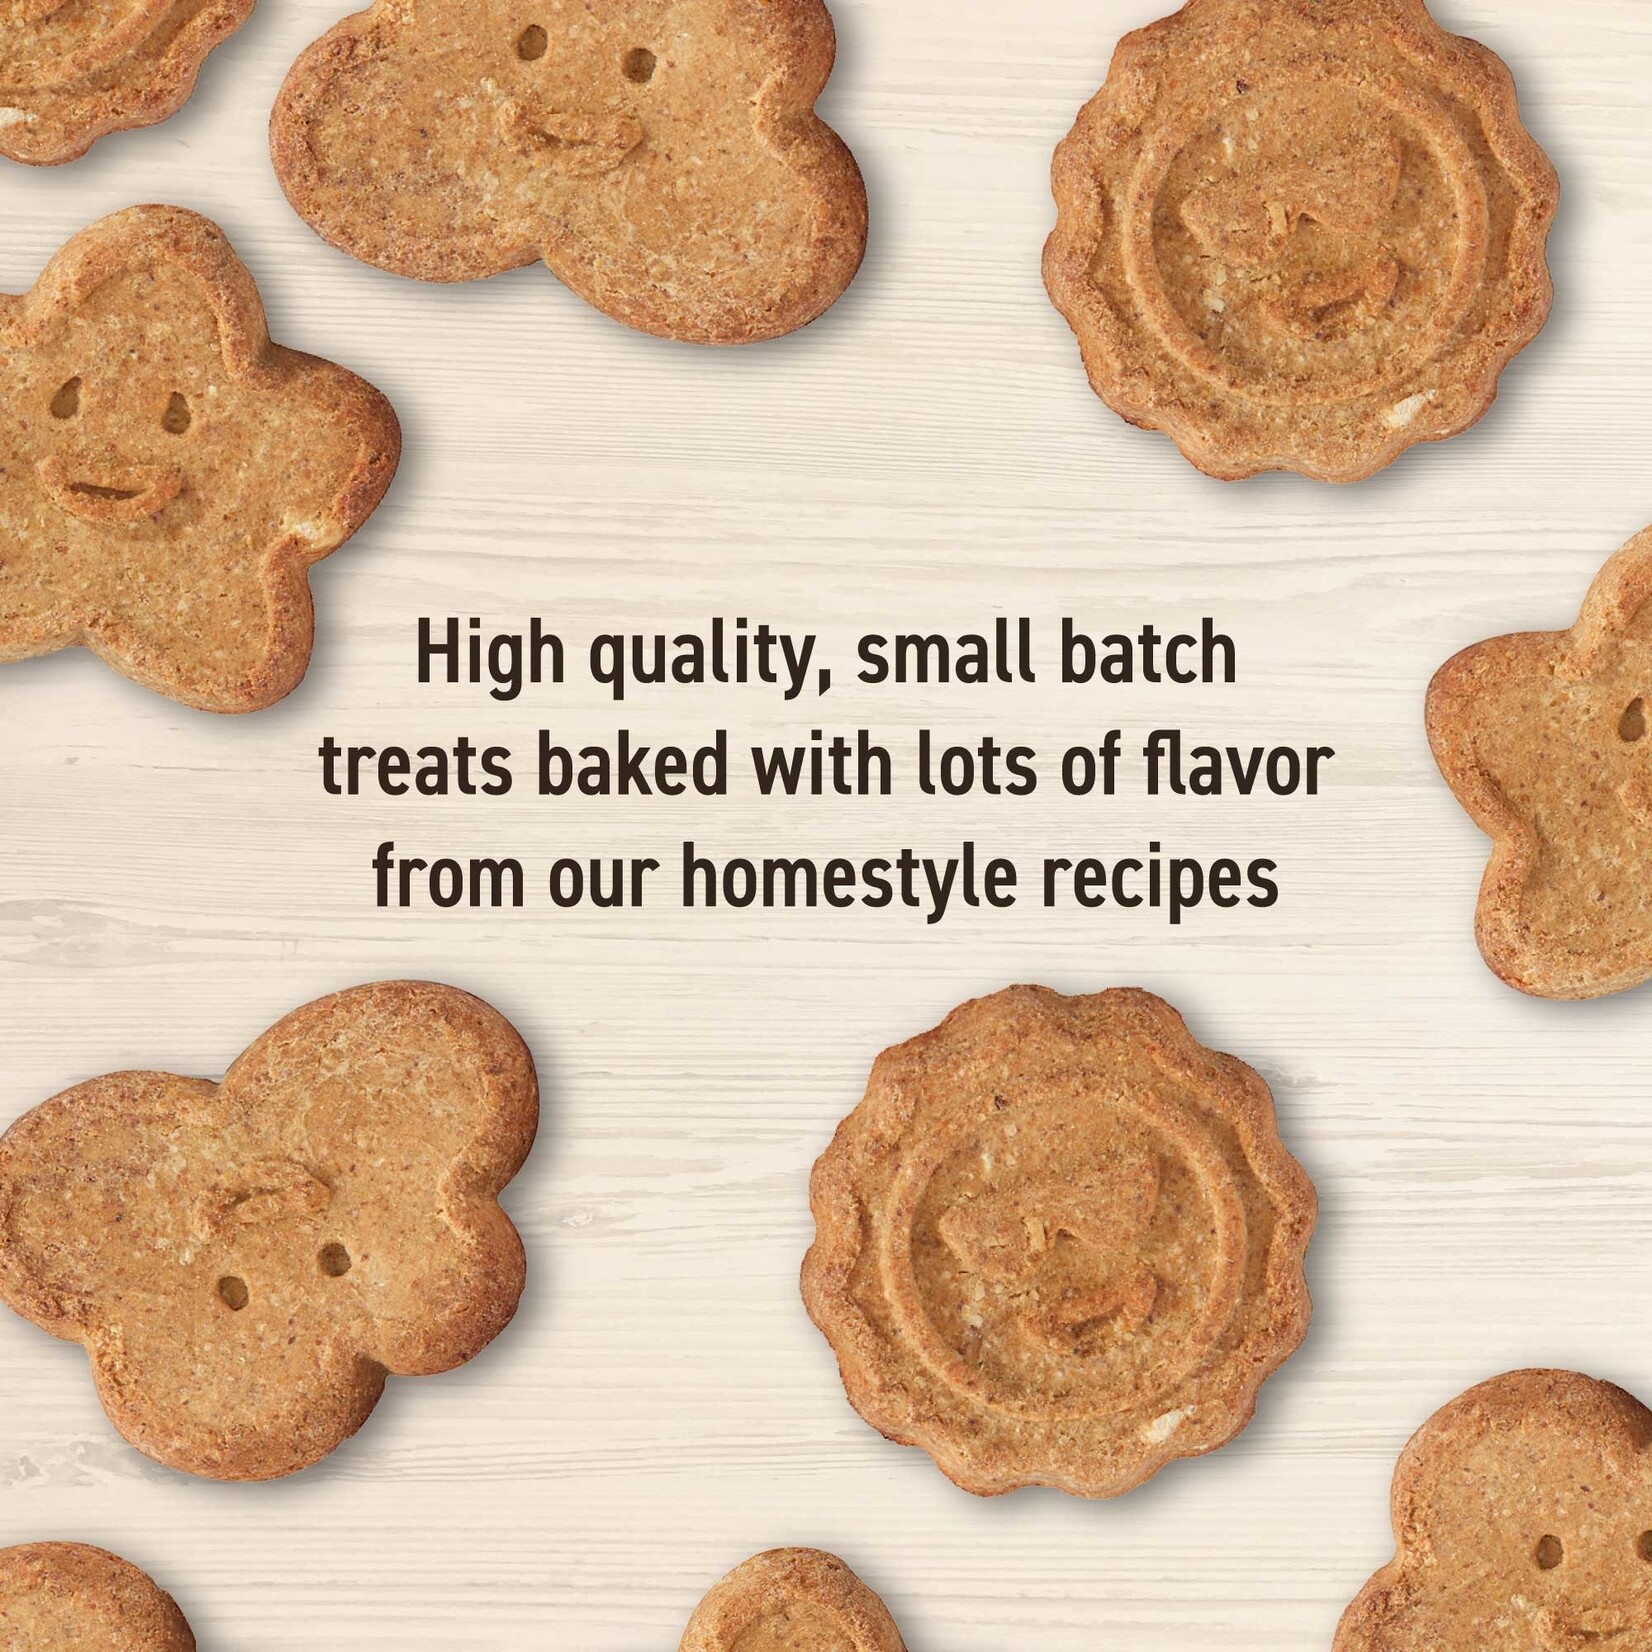 Wag More Bark Less Oven Baked Biscuits with Peanut Butter & Apples